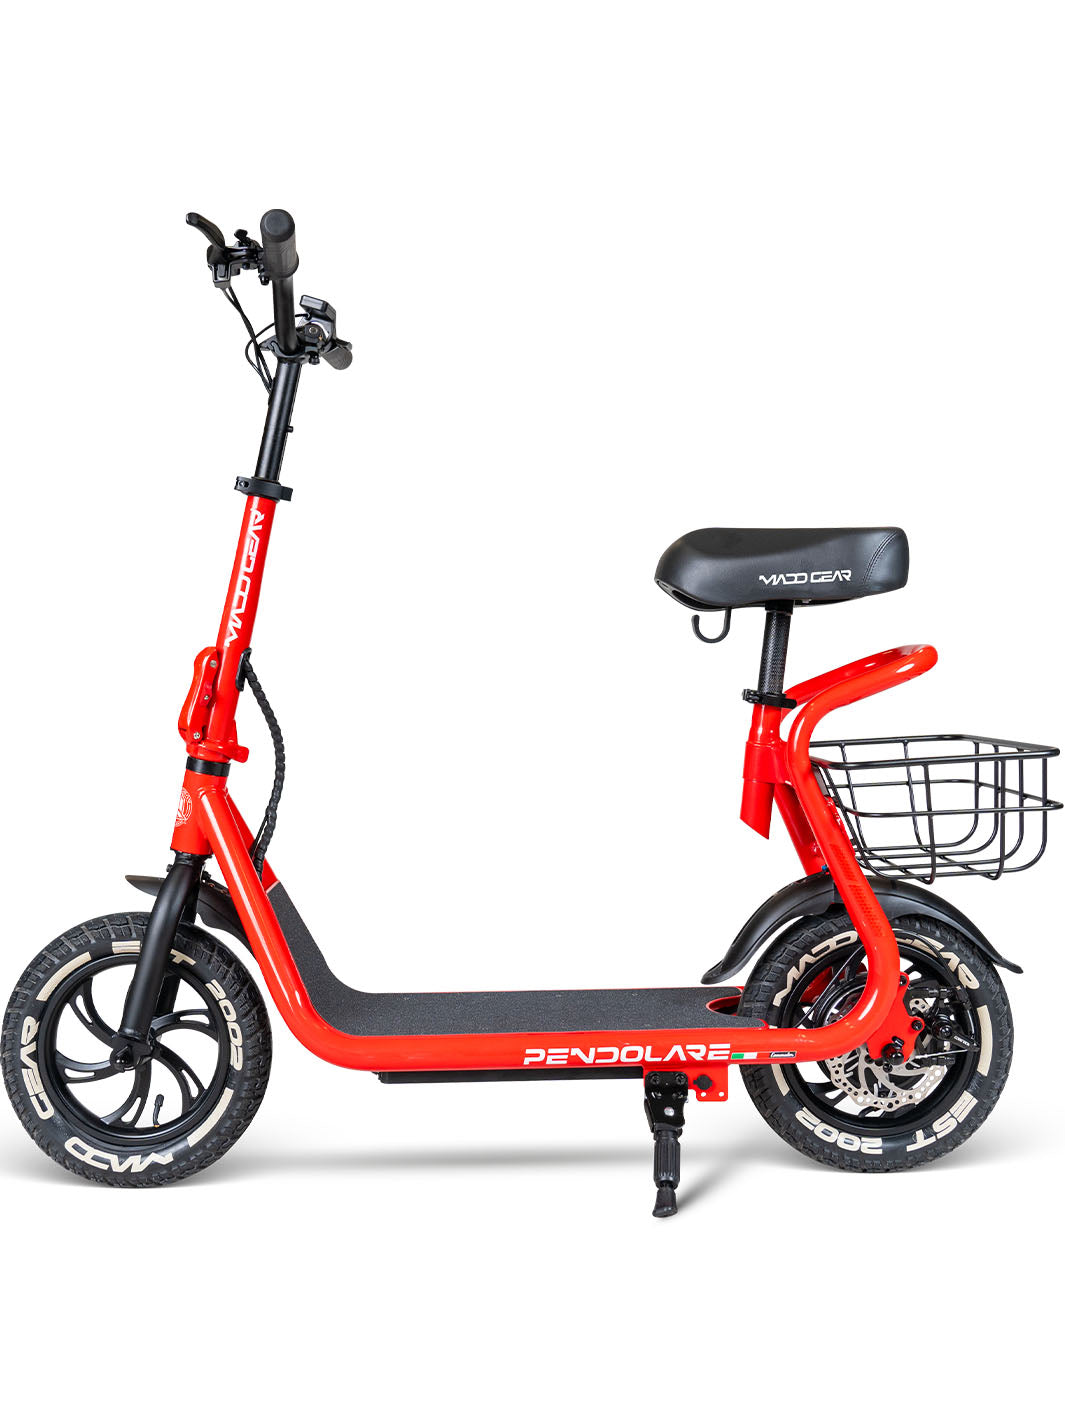 Madd Gear Pendolare 300 Electric Commuter Scooter - Red Pepper